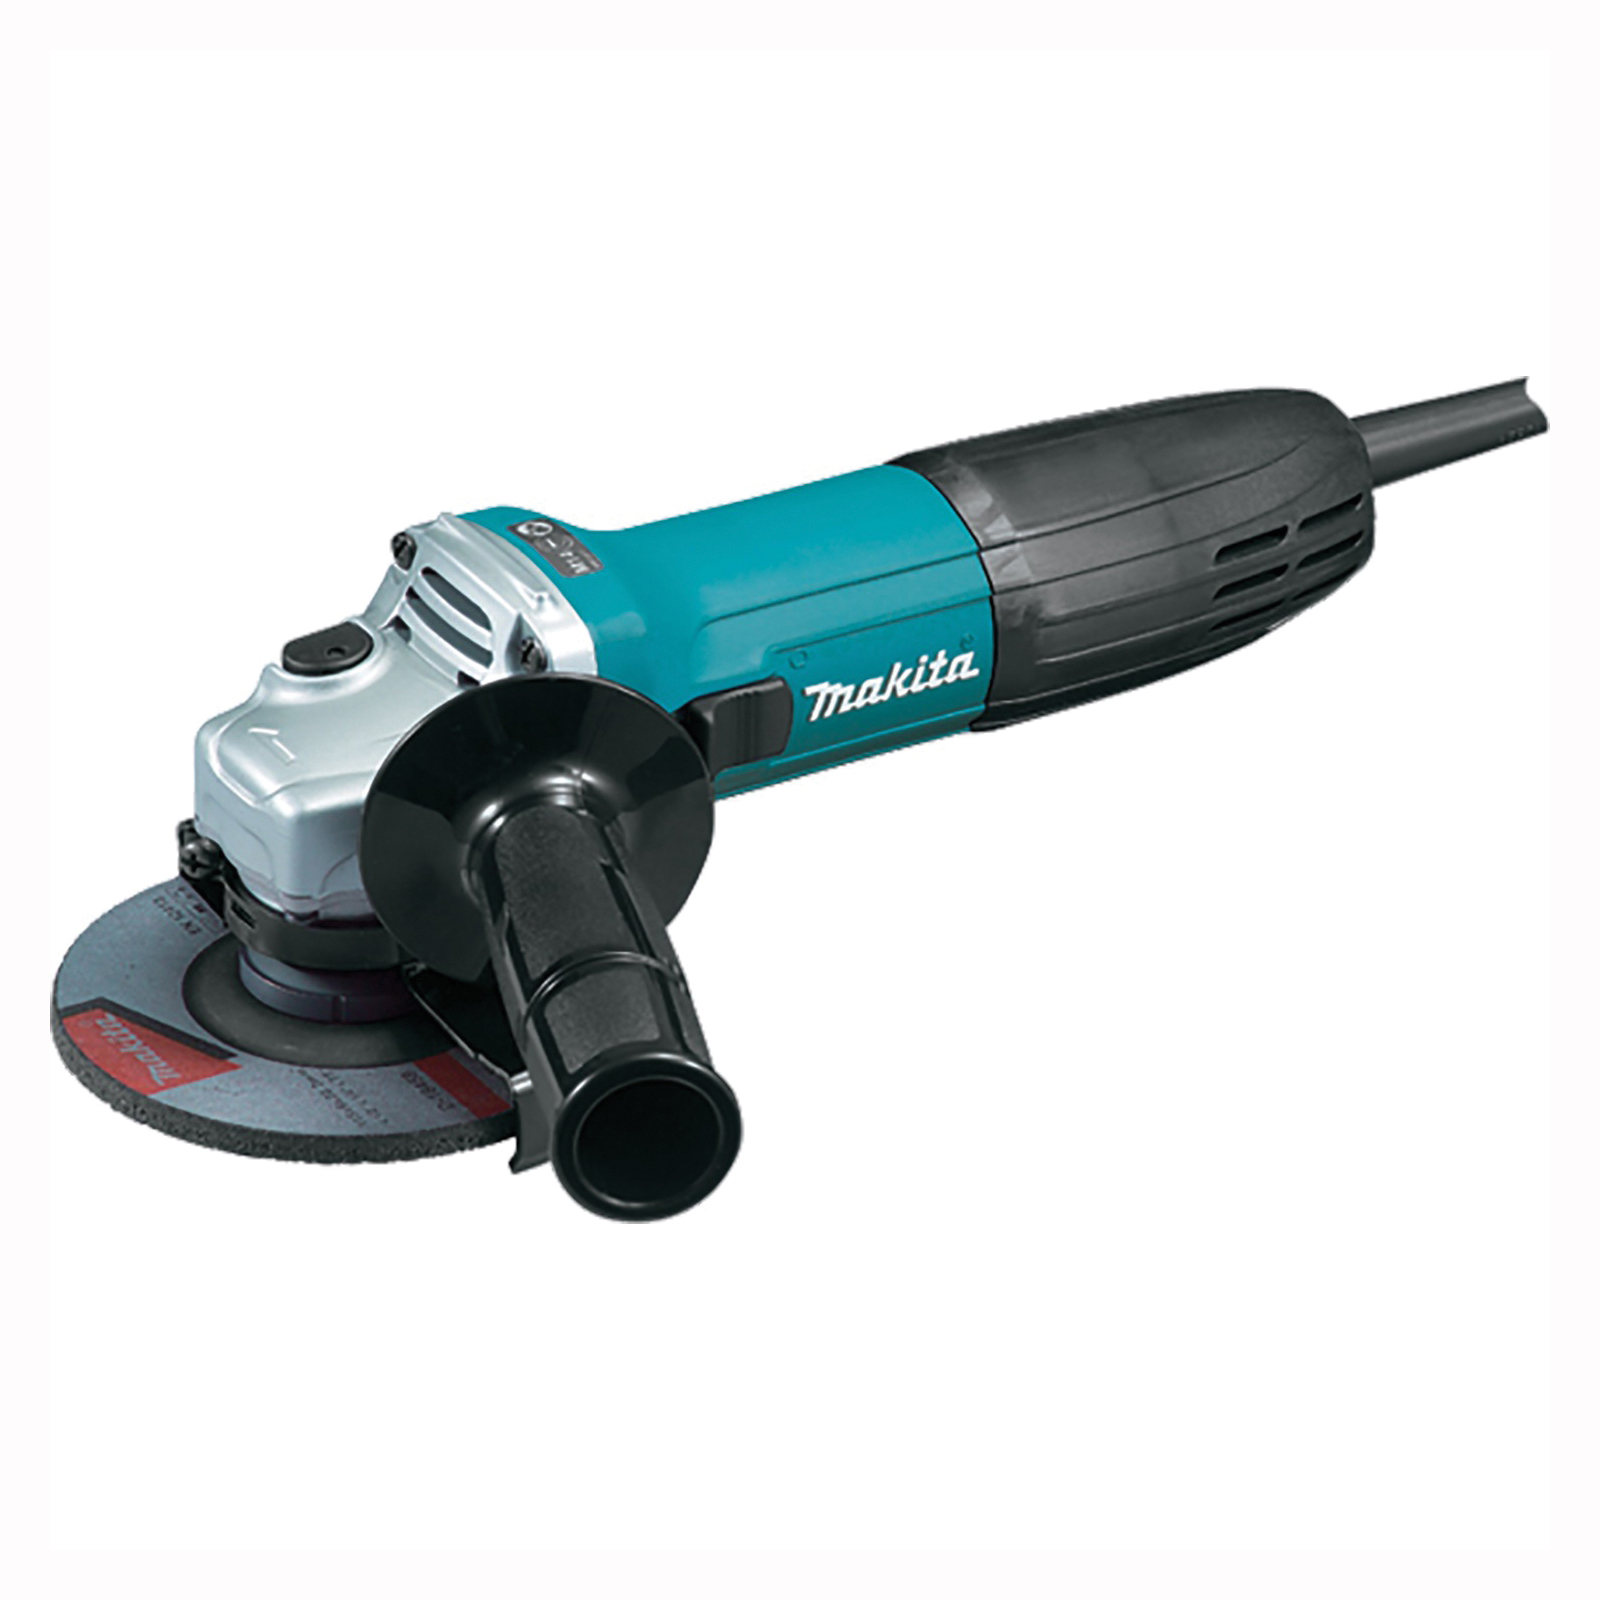 Buy Makita 4-1/2 In. 6A Angle Grinder